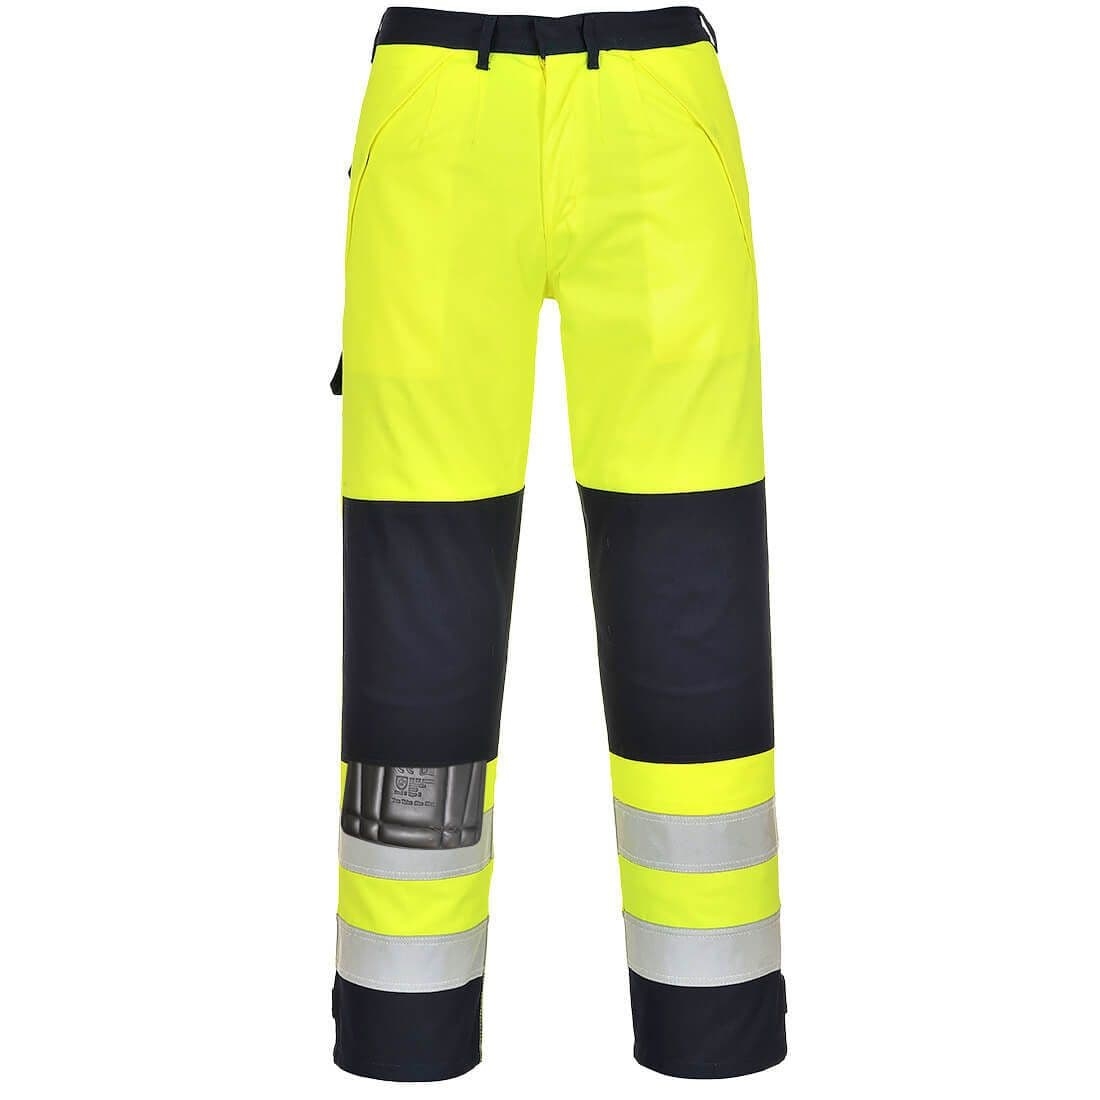 Portwest Hi-Vis Multi-Norm Trousers – Yellow/Navy – XL – Durable – Flame Resistant/Protection – PPE – Taft Safety Store